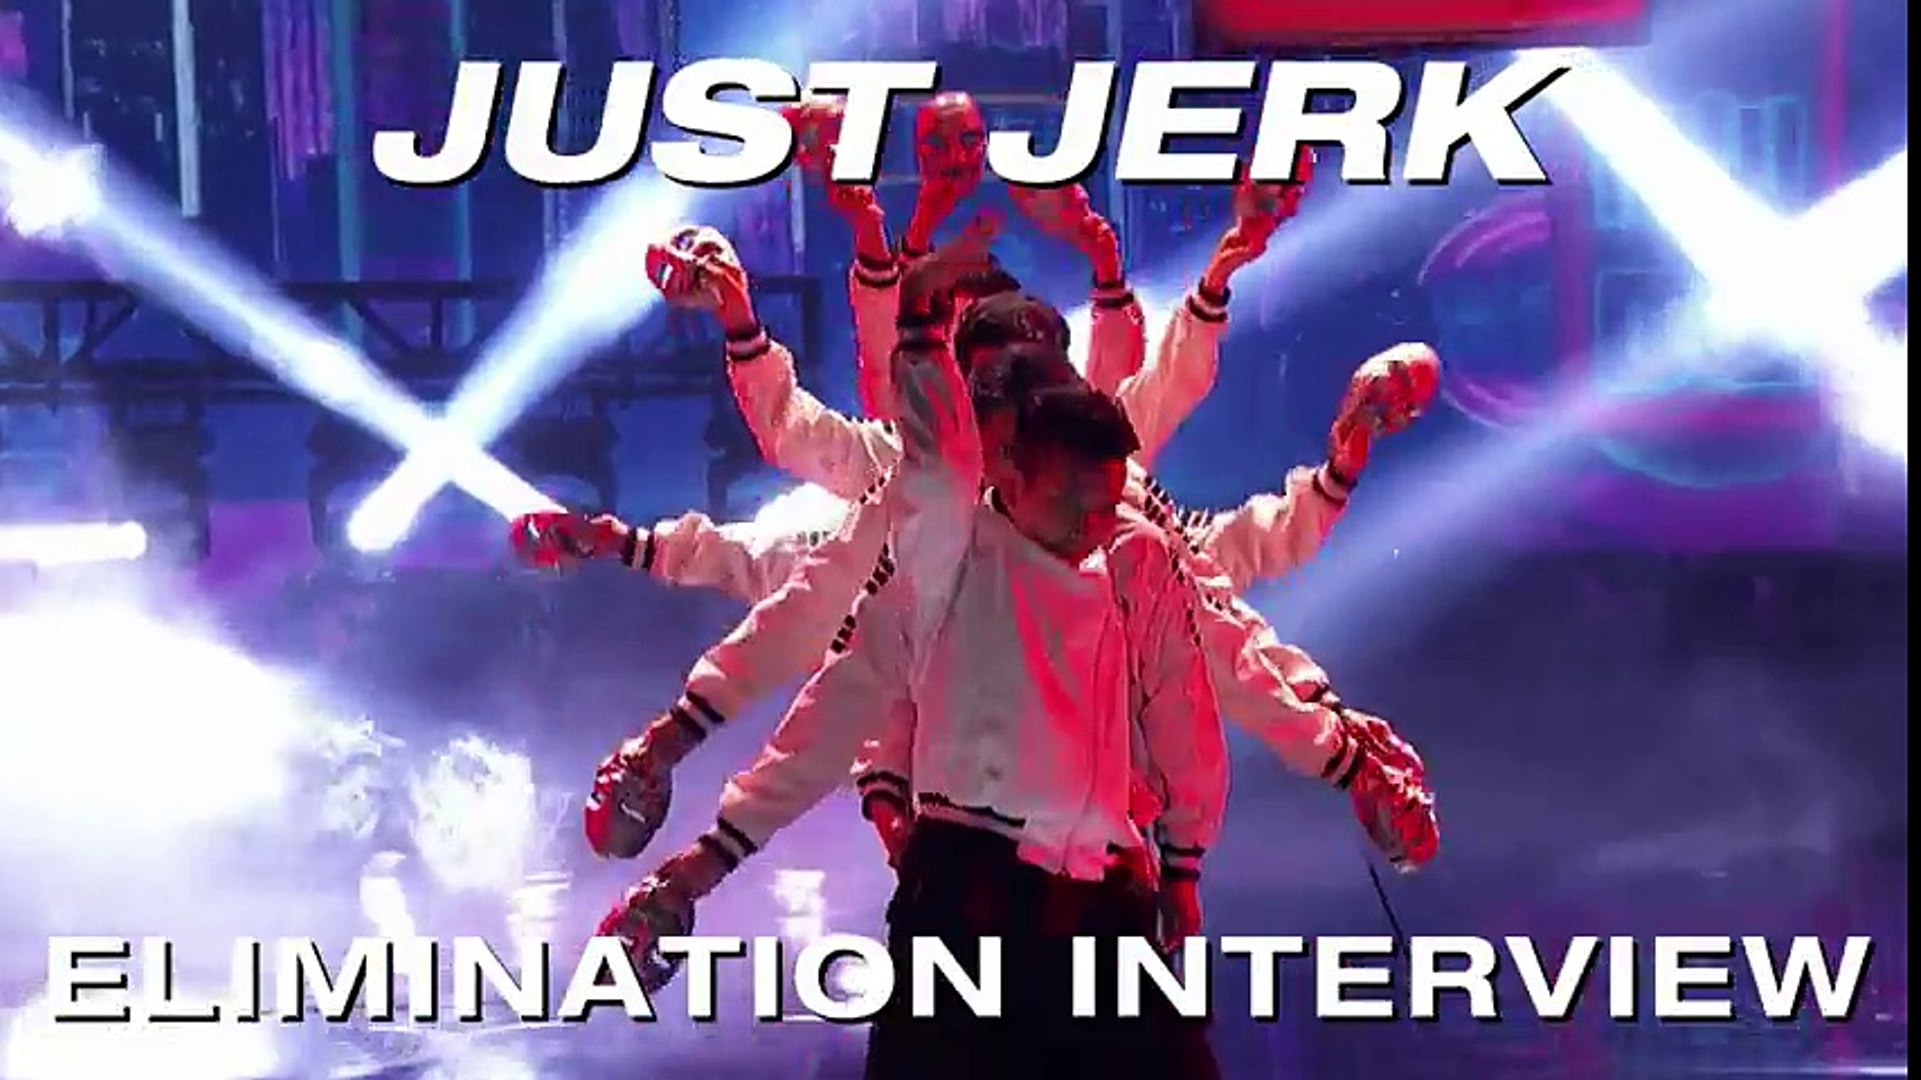 Elimination Interview- Just Jerk Thanks Their Supporters - America's Got Talent 2017